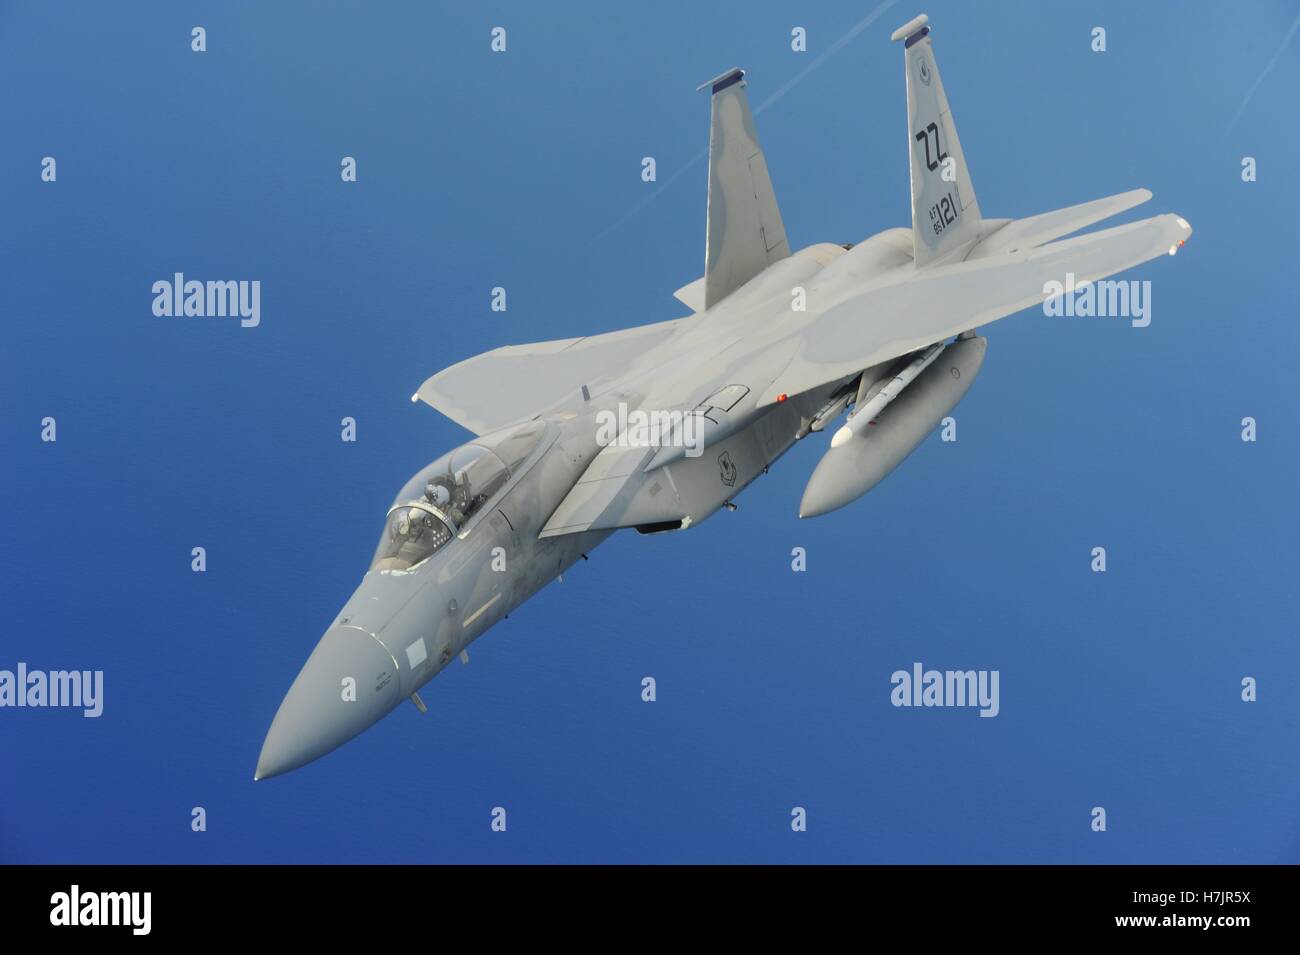 An F-15 Eagle fighter aircraft in flight during exercise Valiant Shield September 19, 2014 over Yigo, Guam. Stock Photo